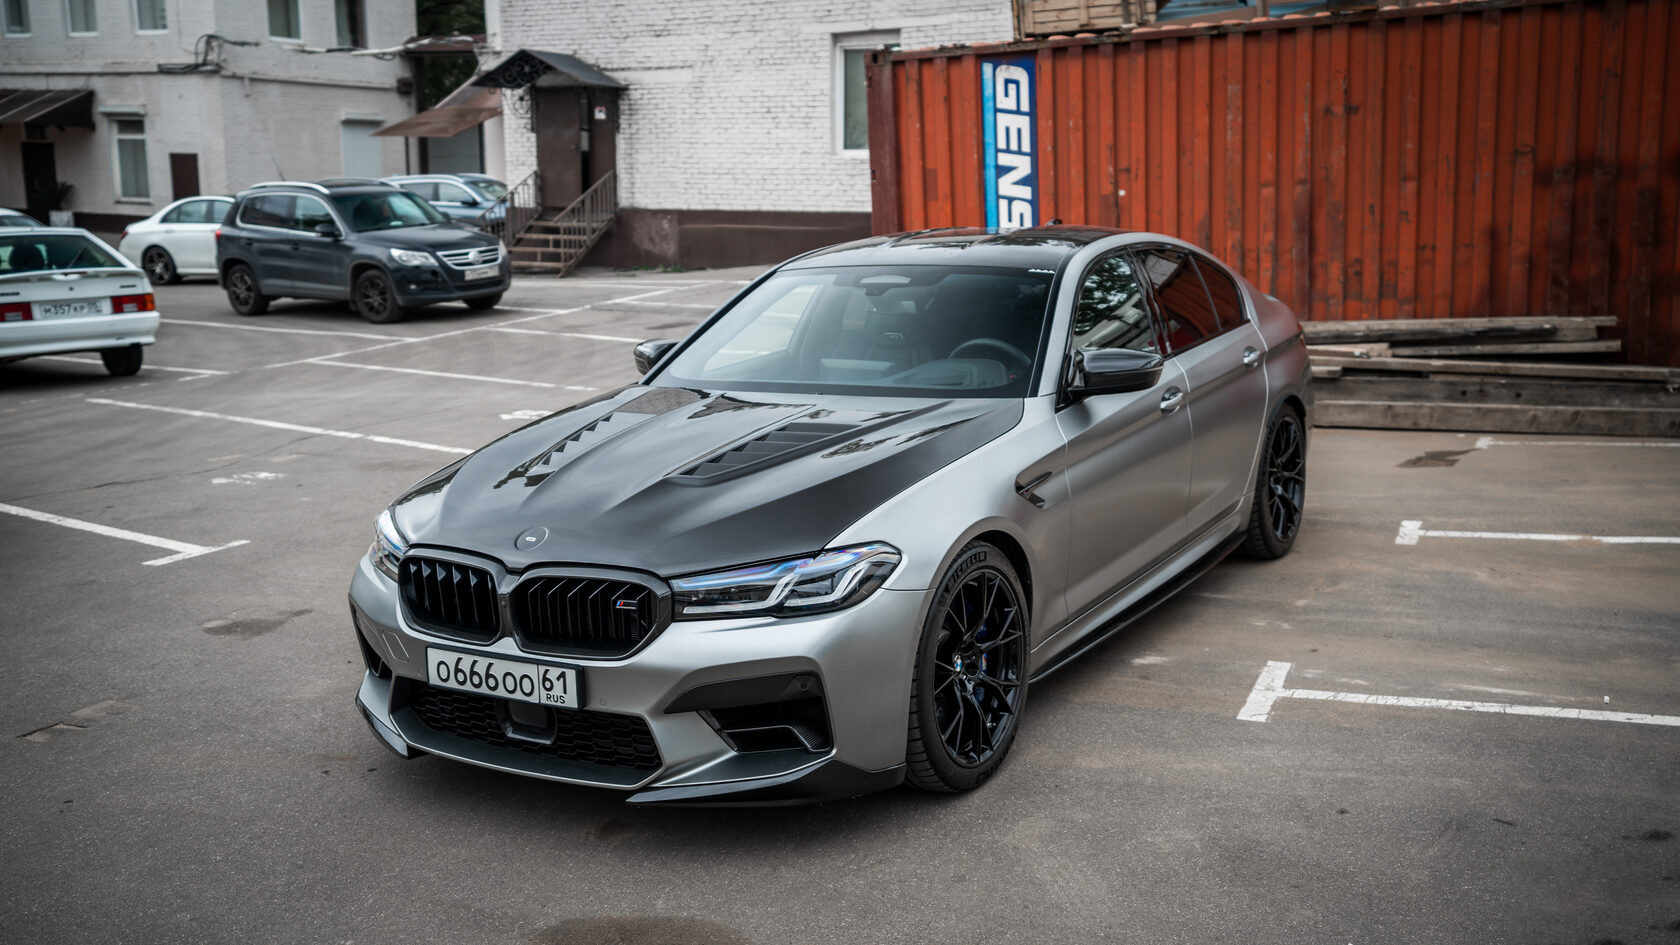 Check price and buy Carbon Fiber Body kit set for BMW M5 F90 Restyling